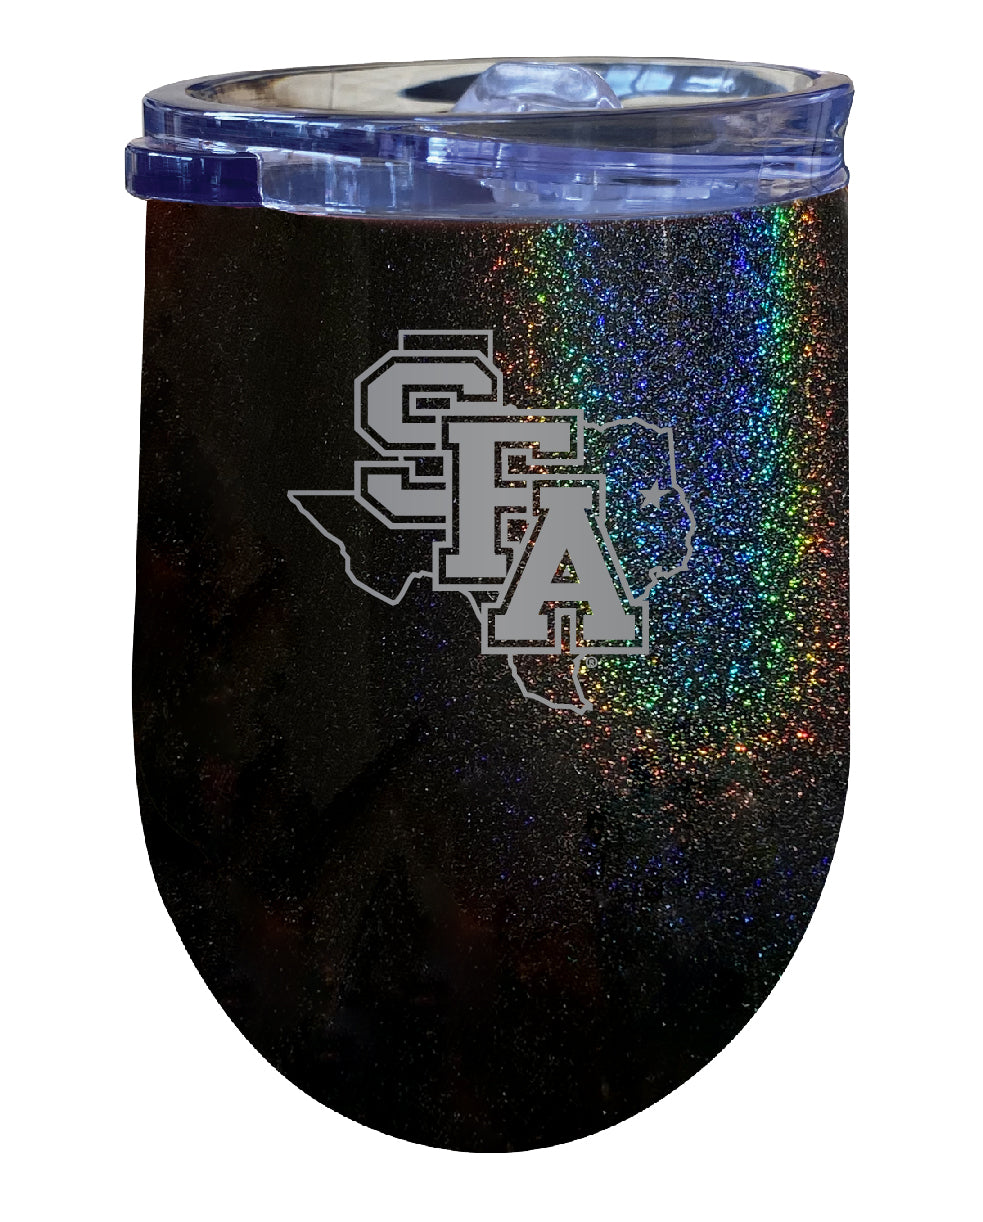 Stephen F. Austin State University 12 oz Laser Etched Insulated Wine Stainless Steel Tumbler Rainbow Glitter Black